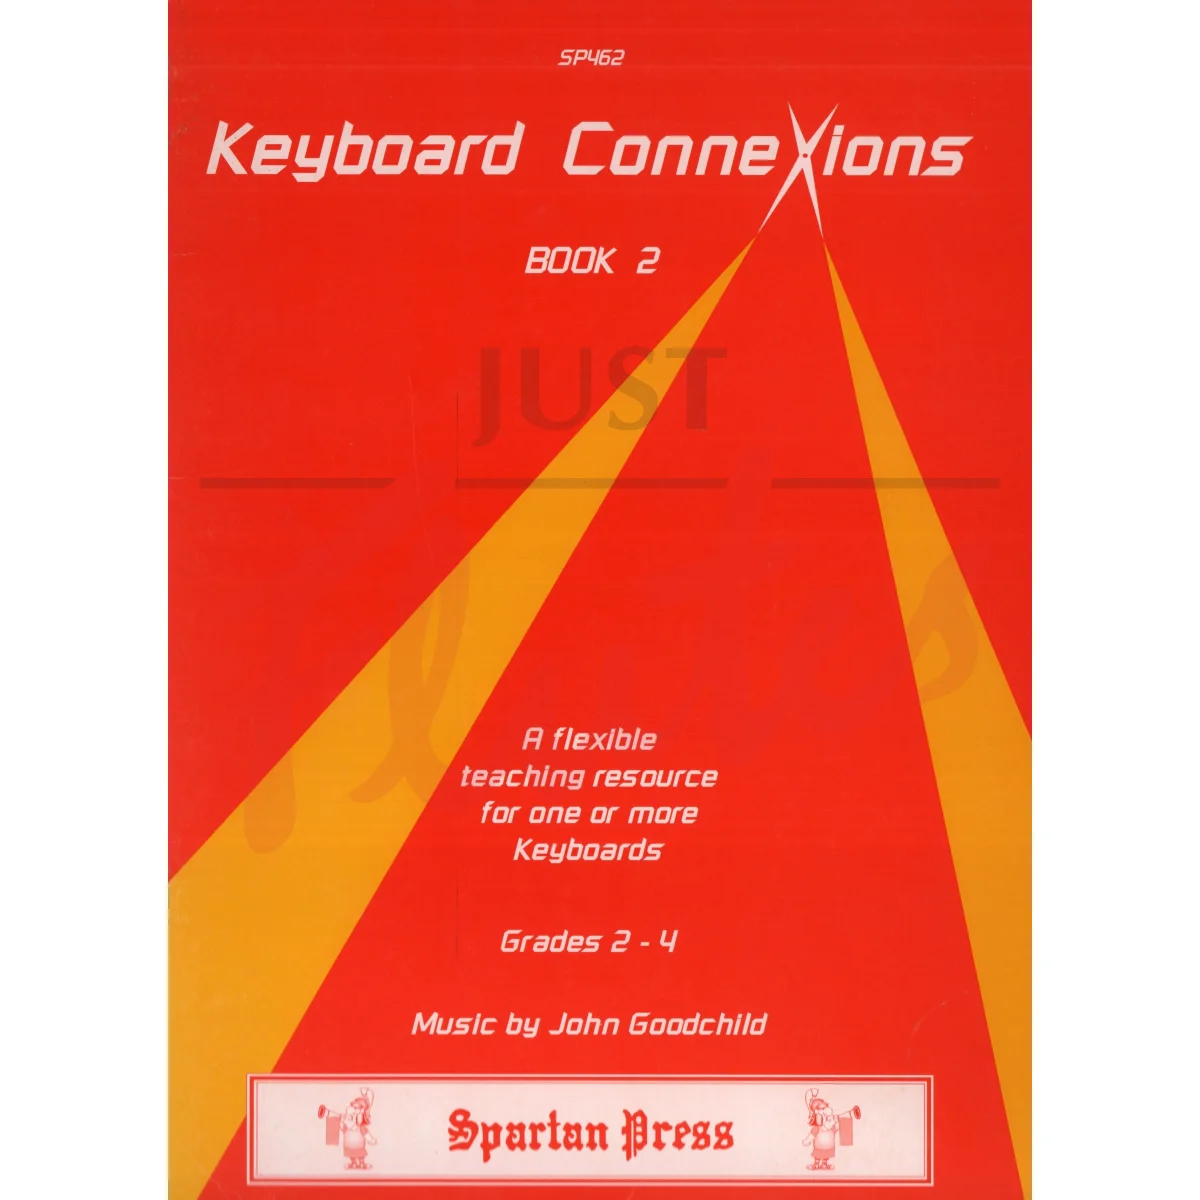 Keyboard Connexions Book 2